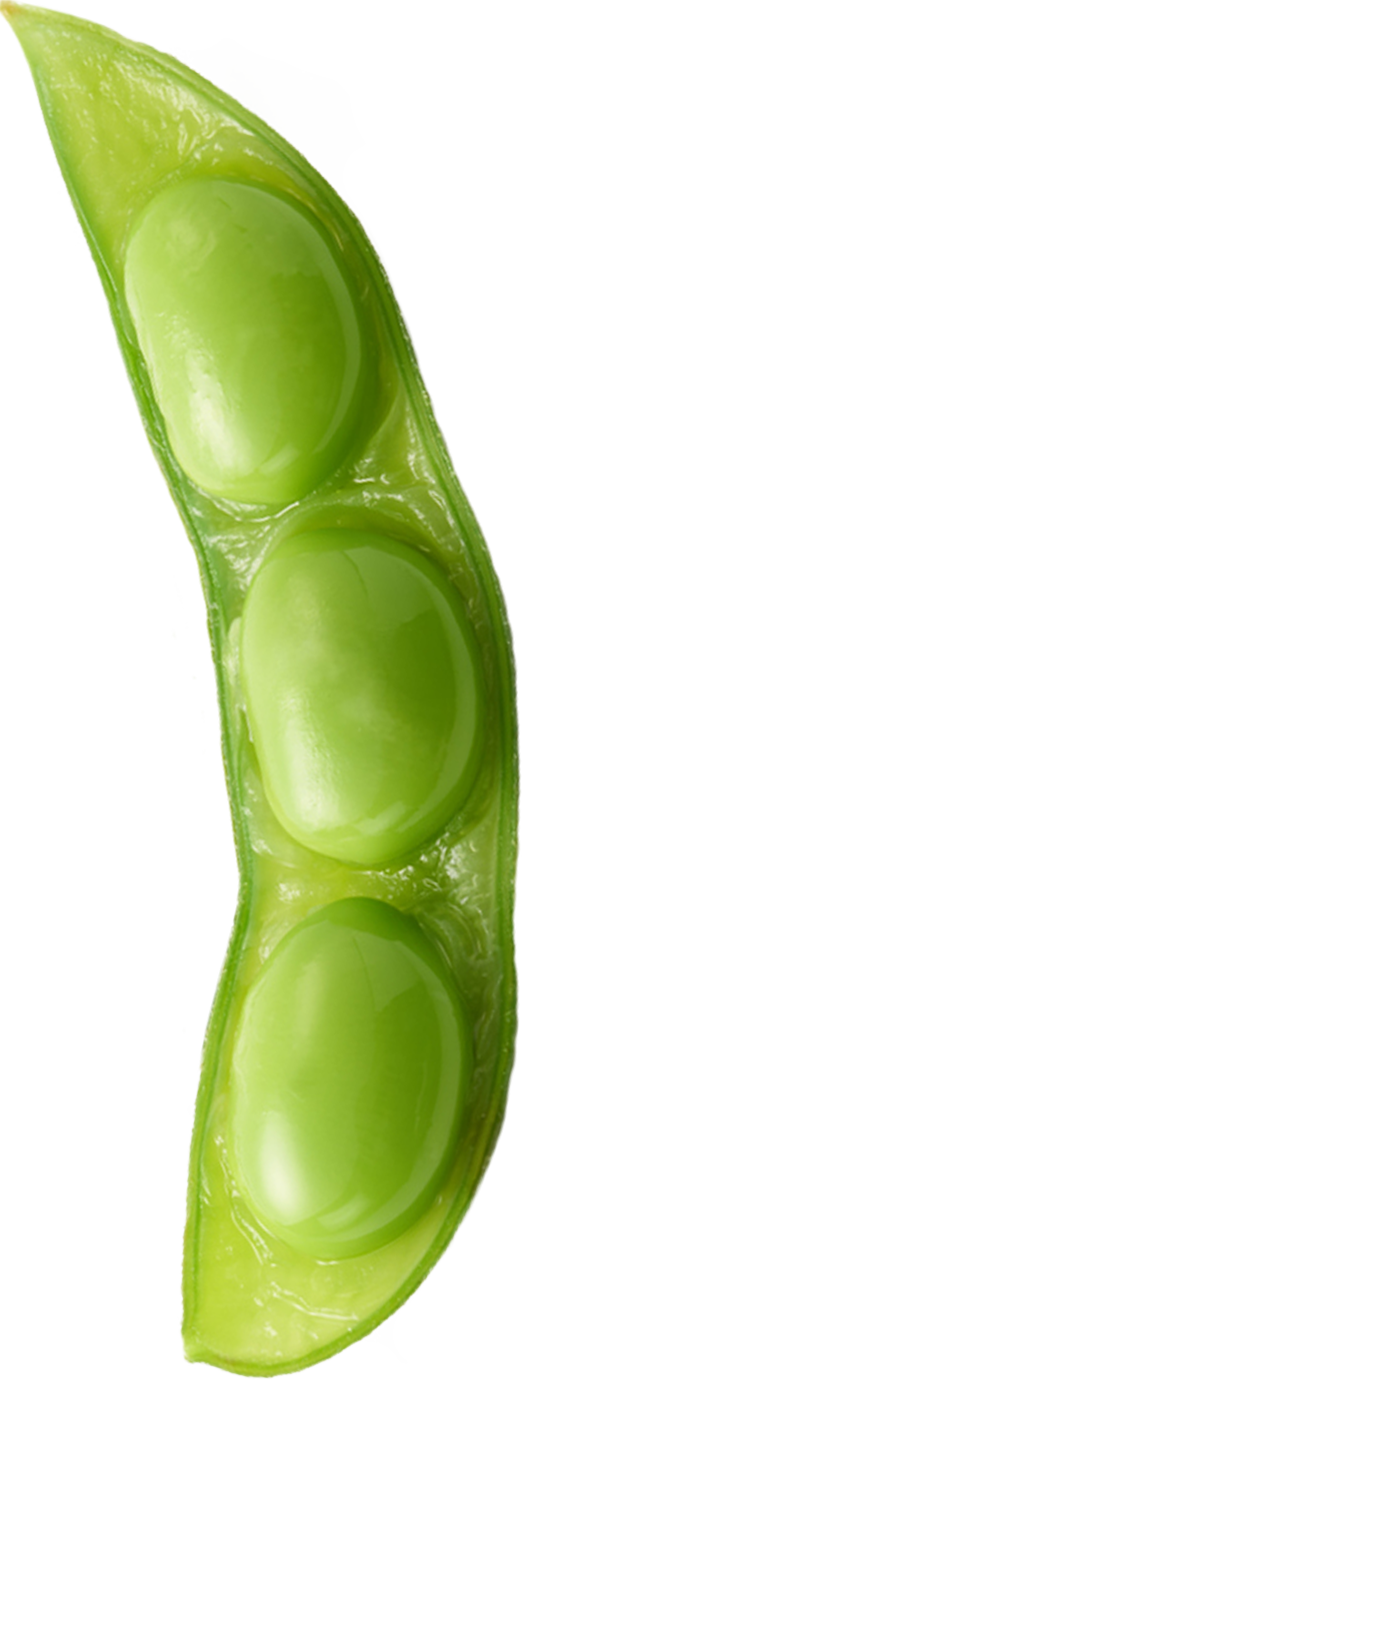 Soy bean pod with beans exposed